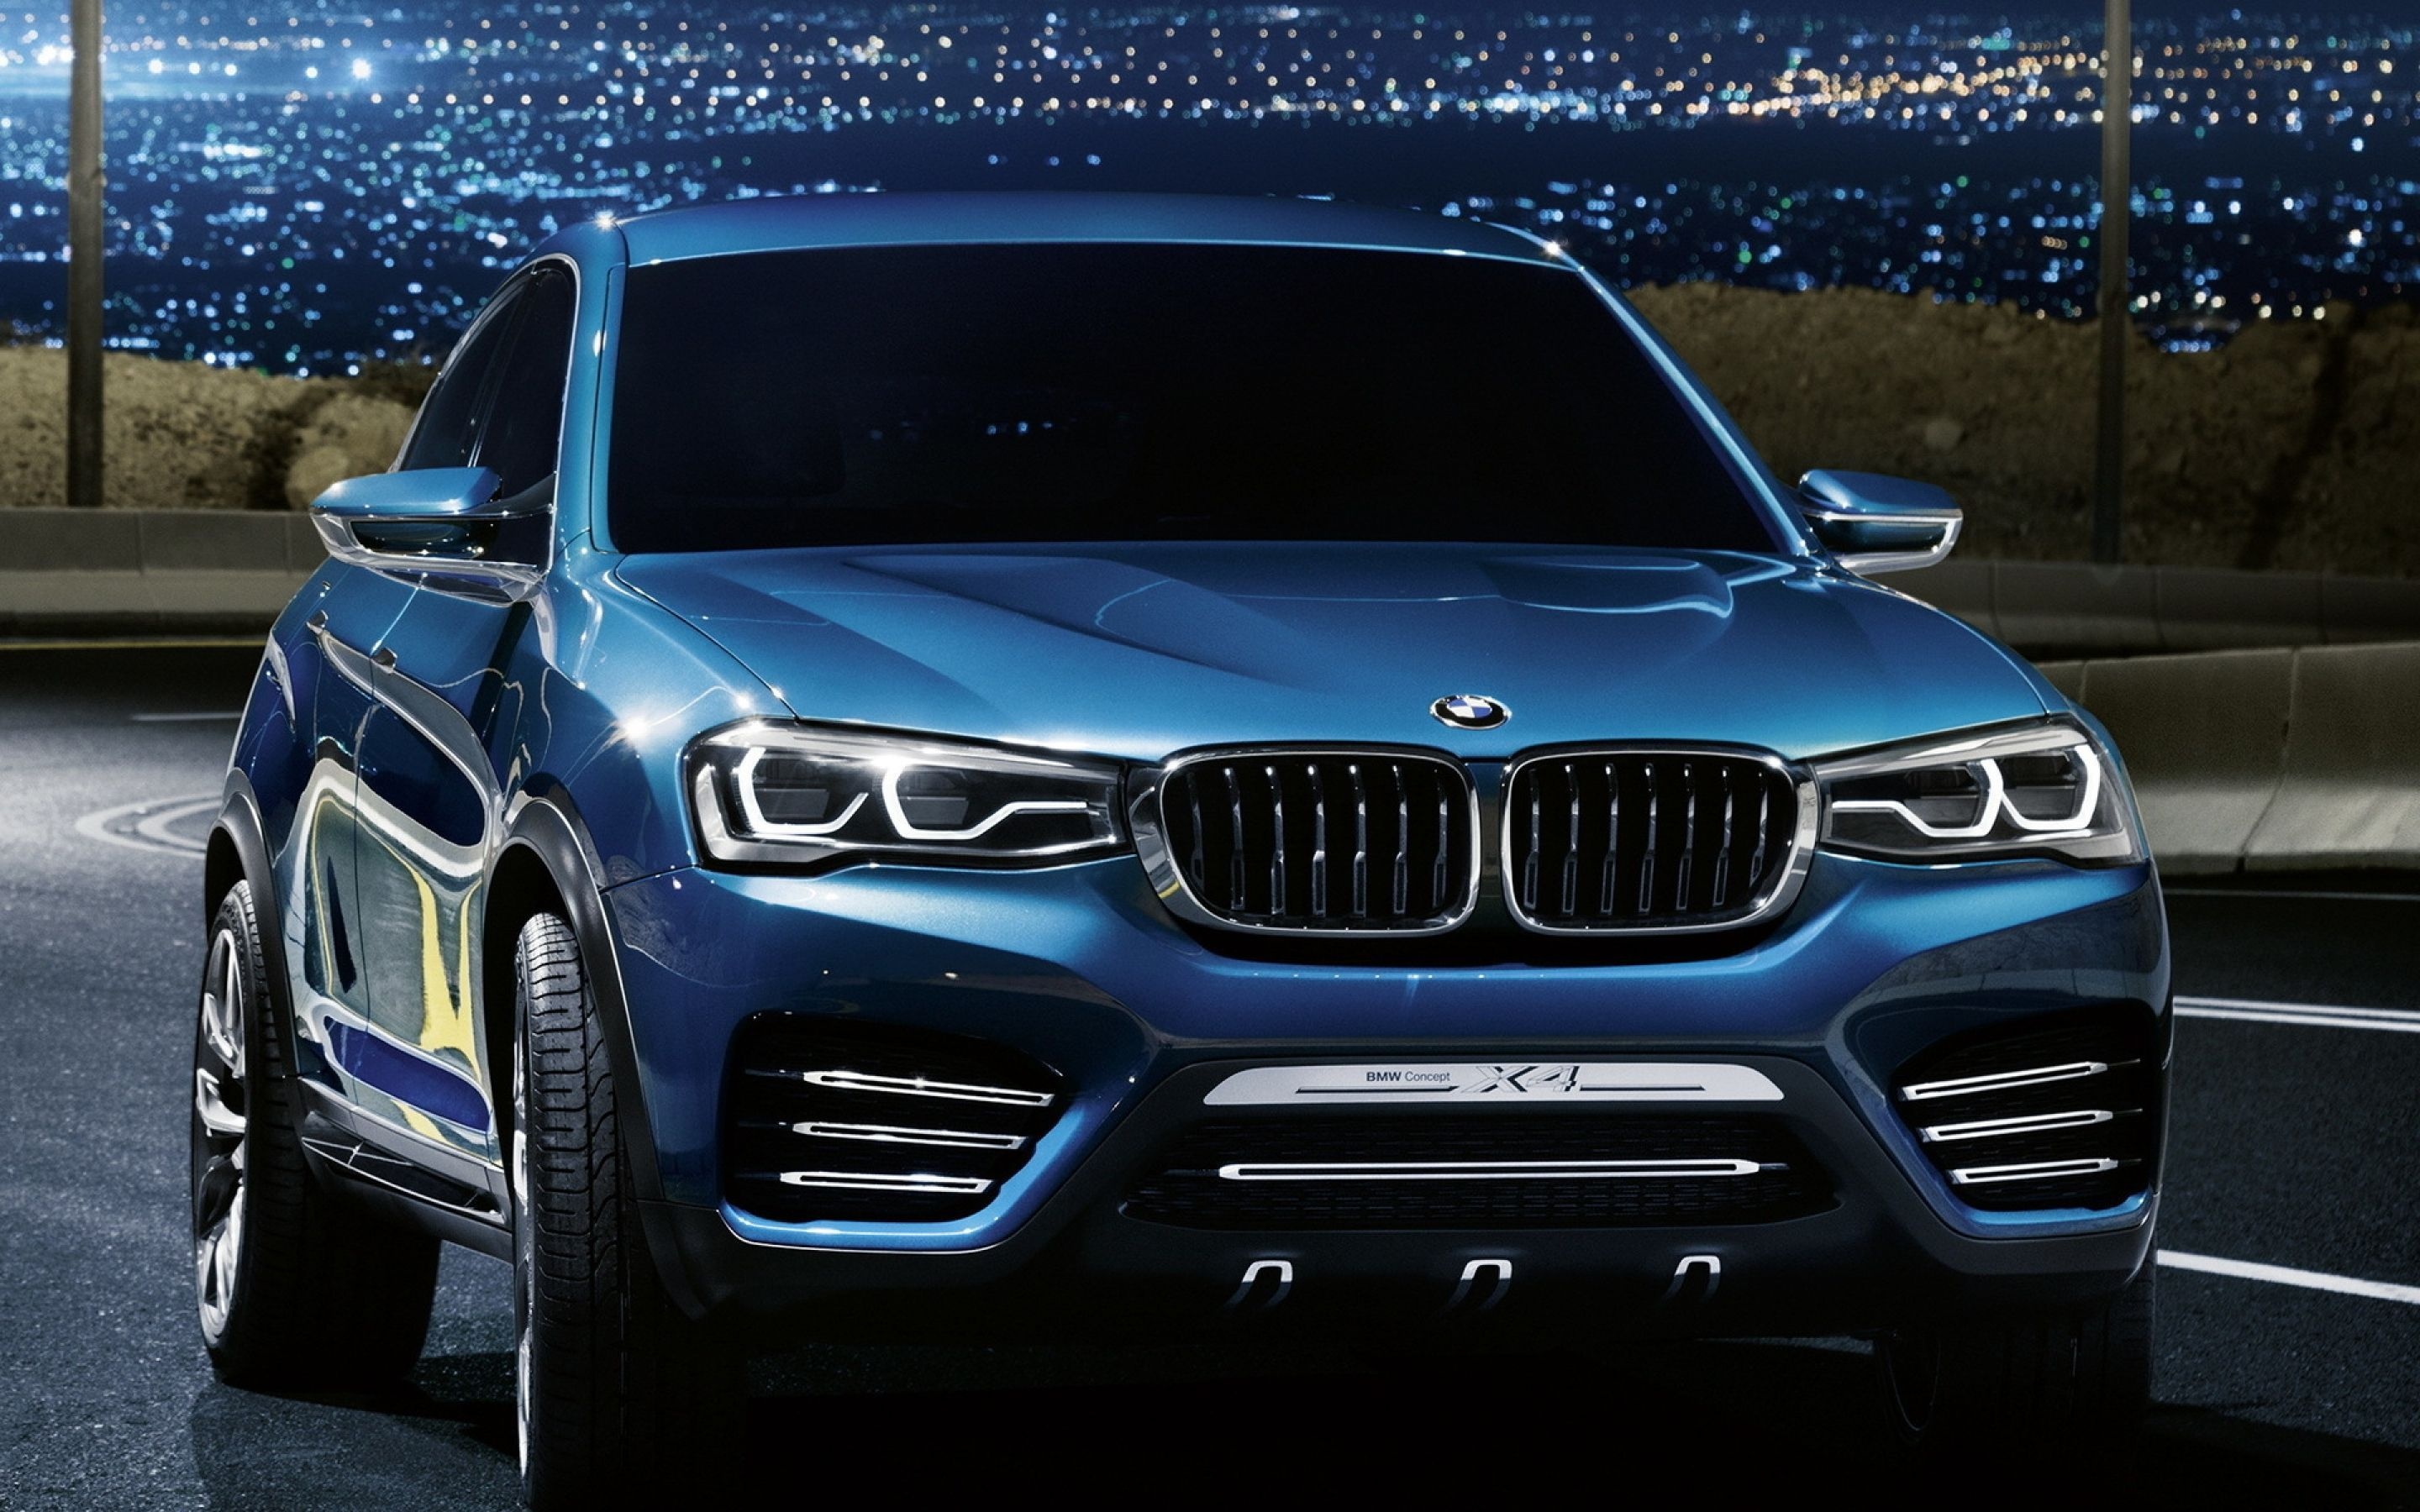 BMW X4, Top-rated wallpapers, Sporty SUV, Eye-catching design, 2880x1800 HD Desktop